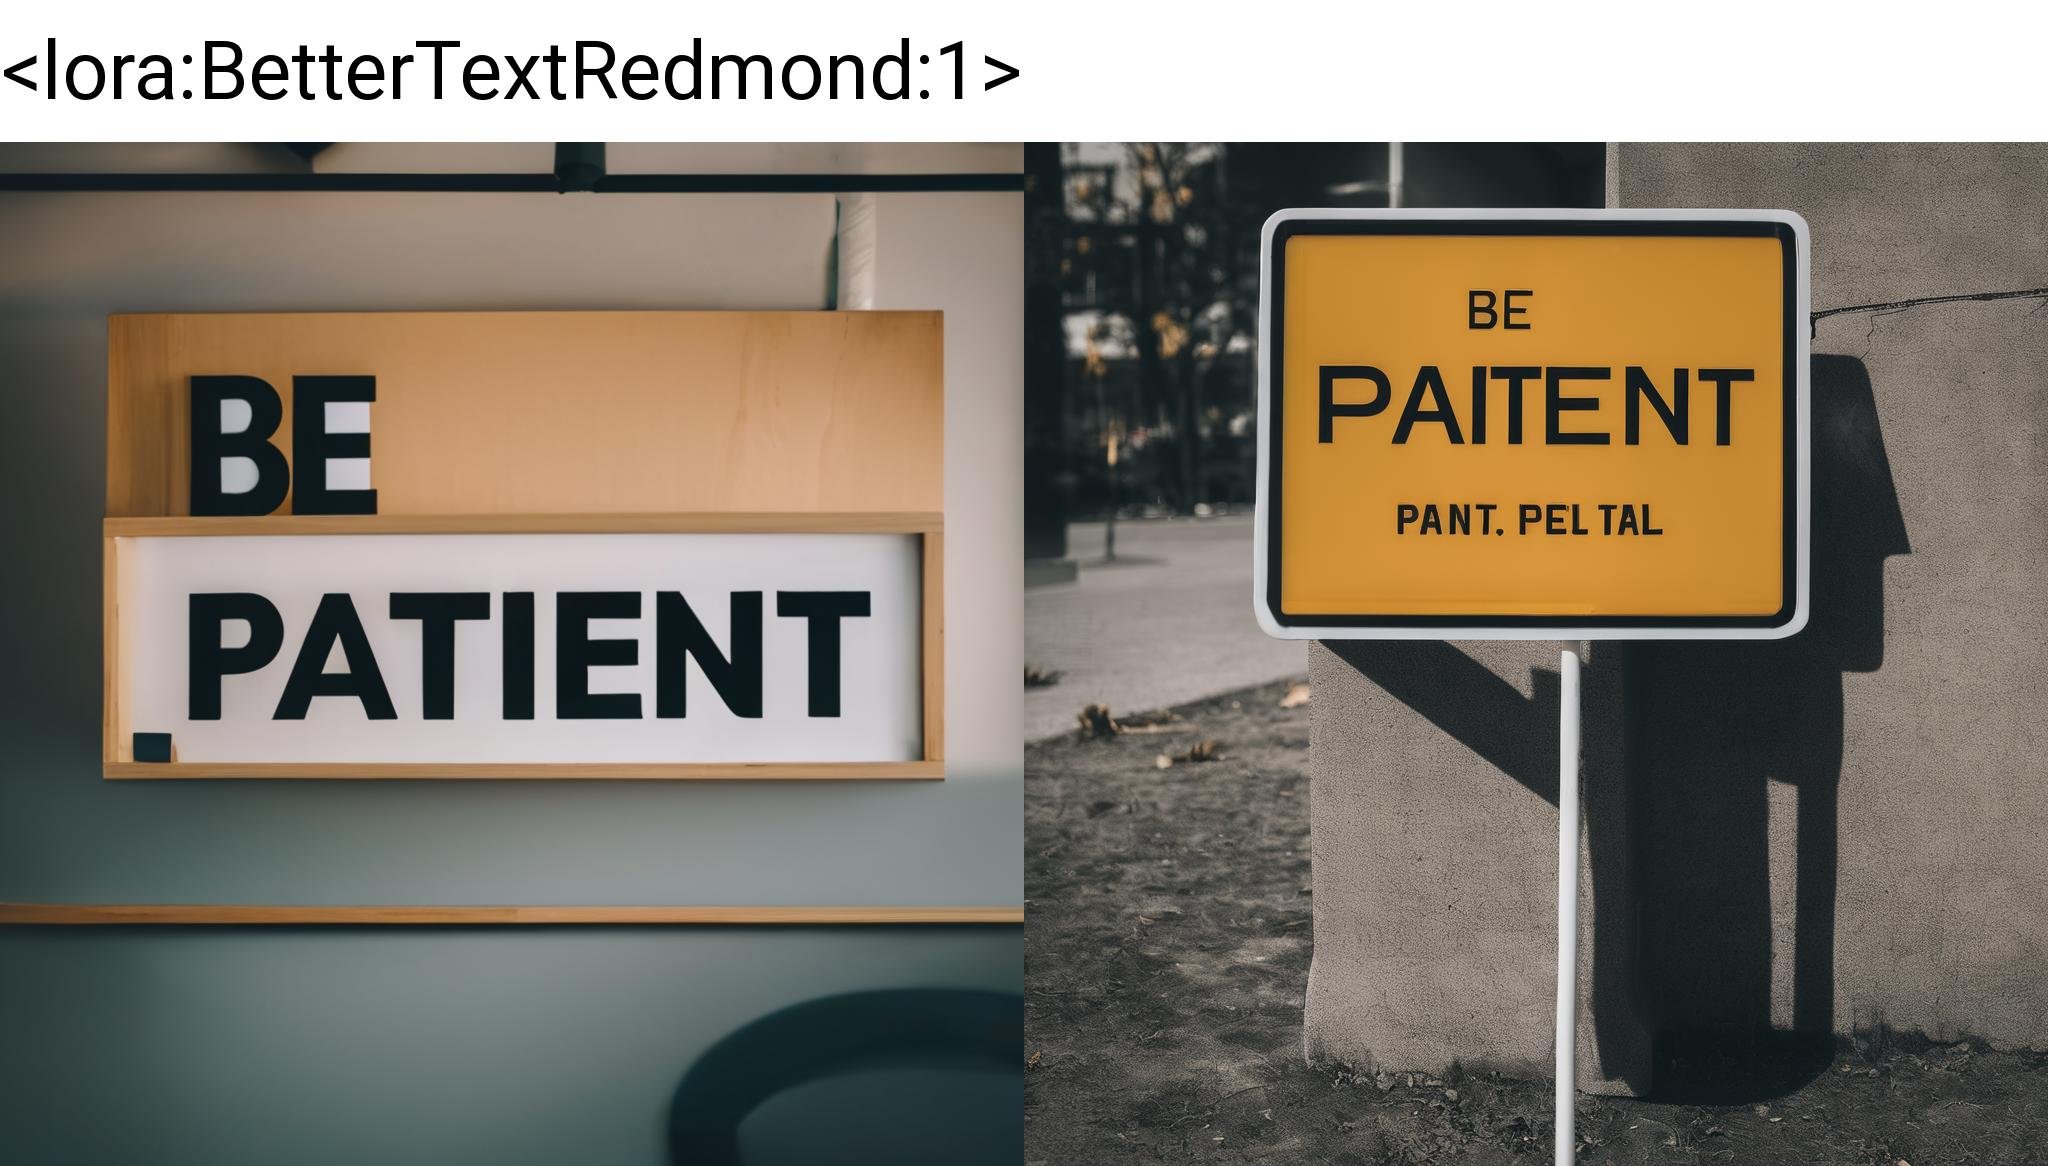 A sign WITH "BE PATIENT" on it, <lora:BetterTextRedmond:1>